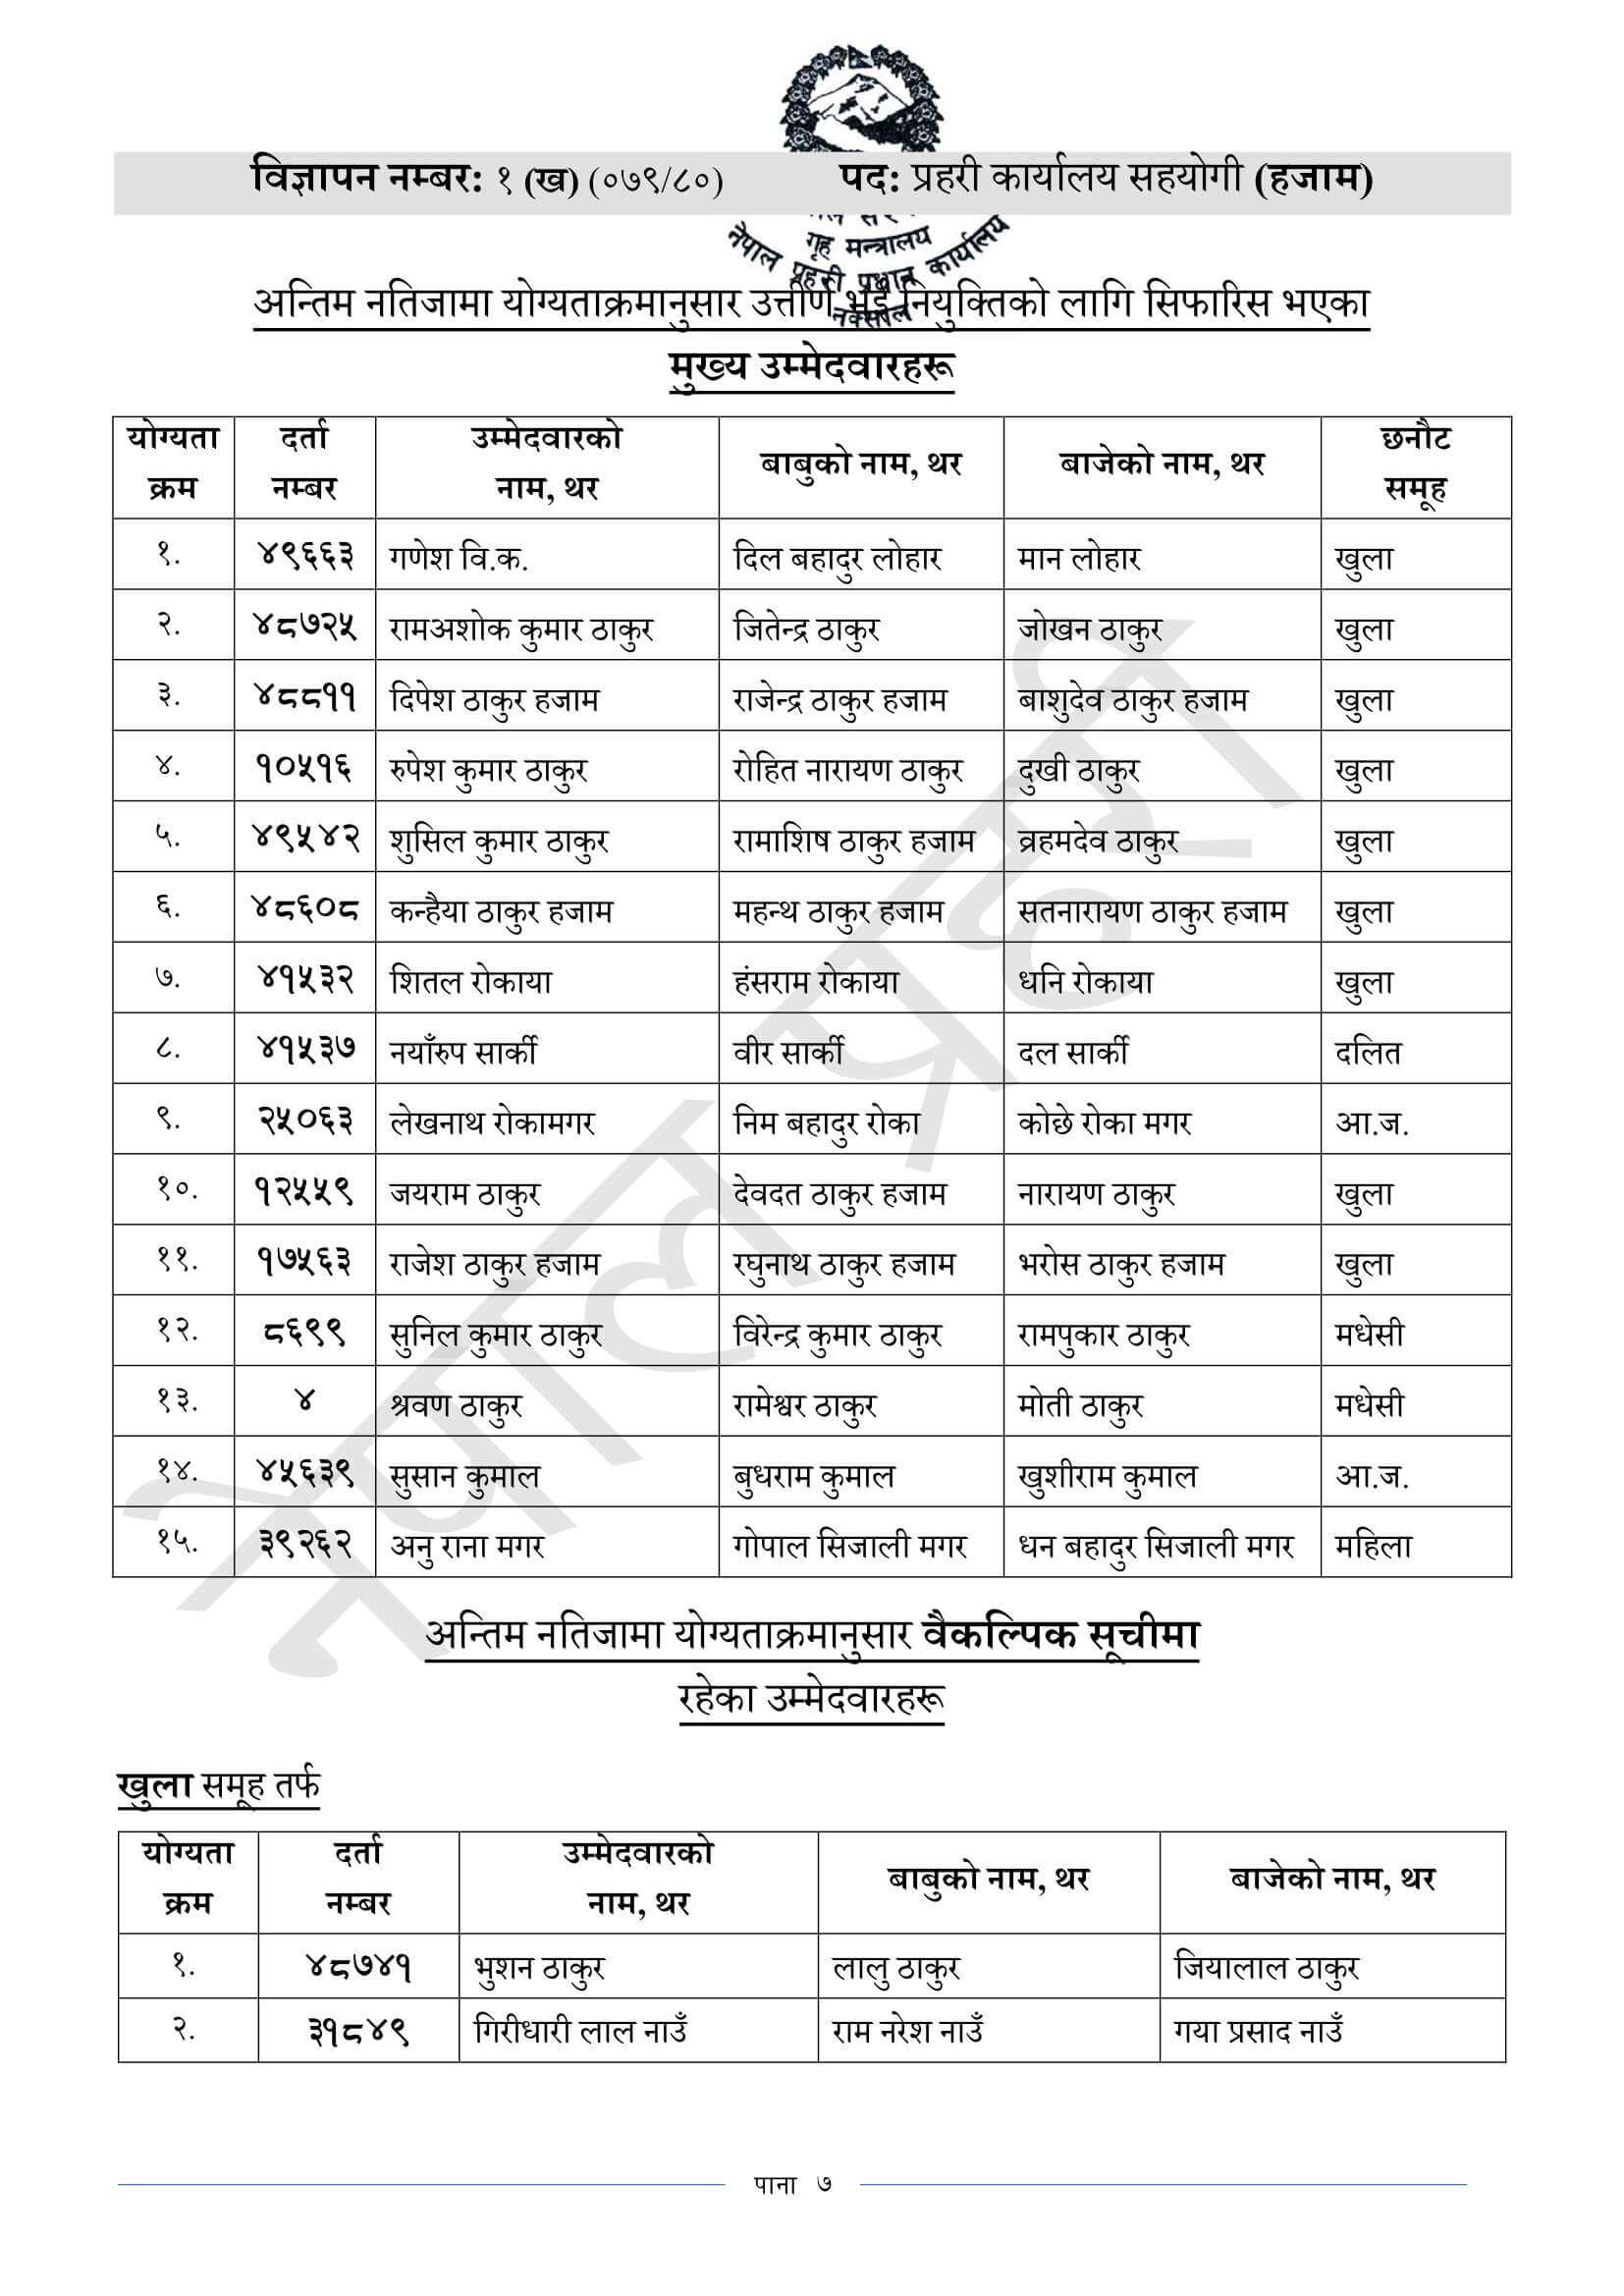 Nepal Police Office Assistant Final Exam Result